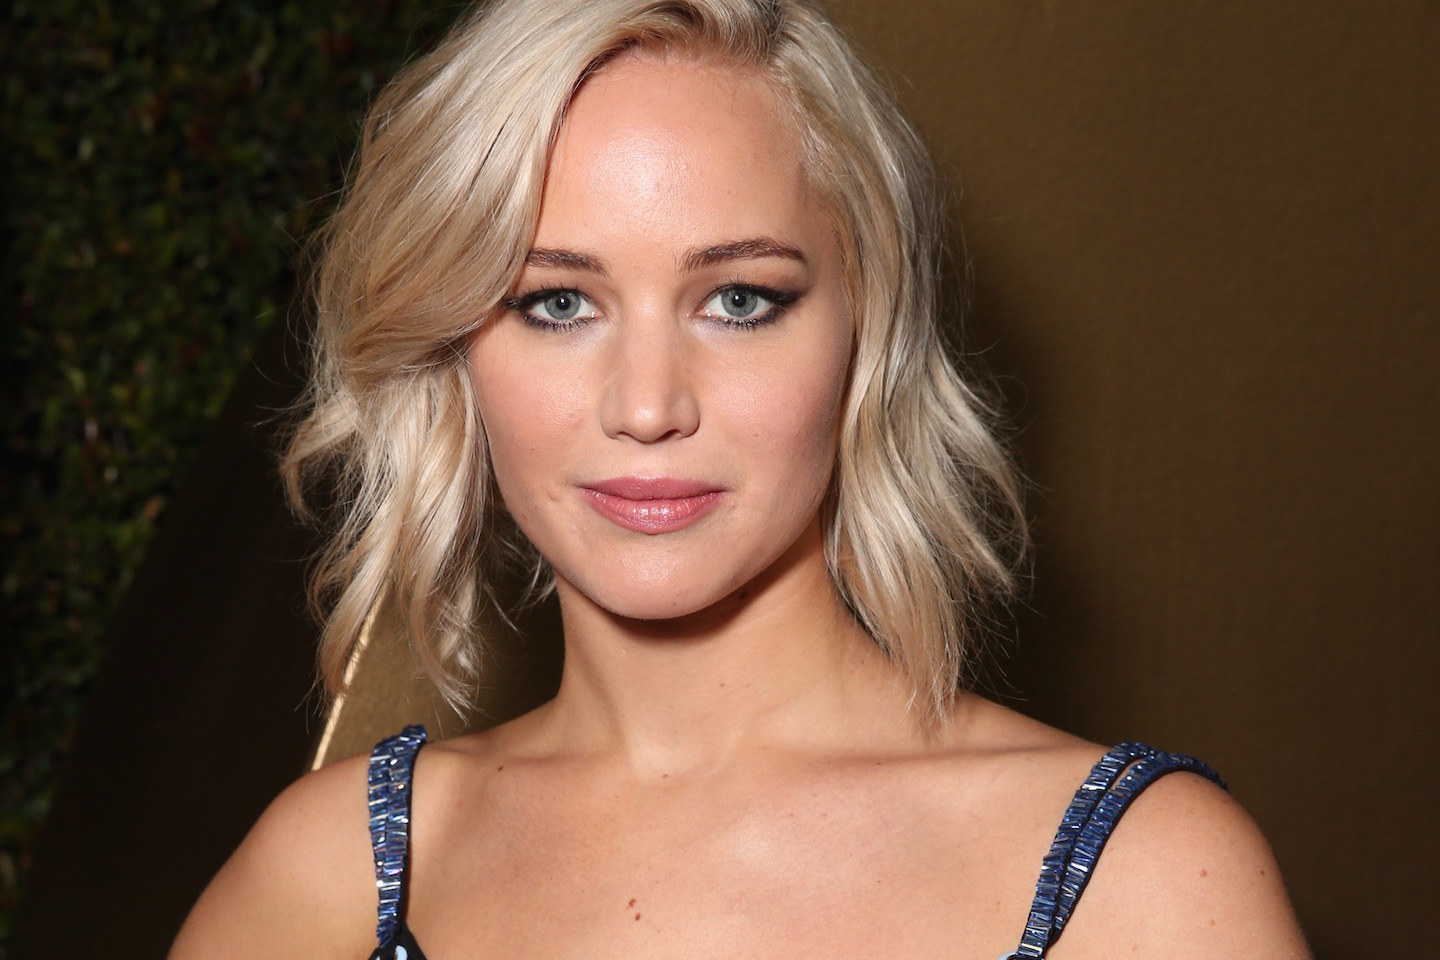 20 Photos of Jennifer Lawrence That Will Make You Say - Wtf Gallery